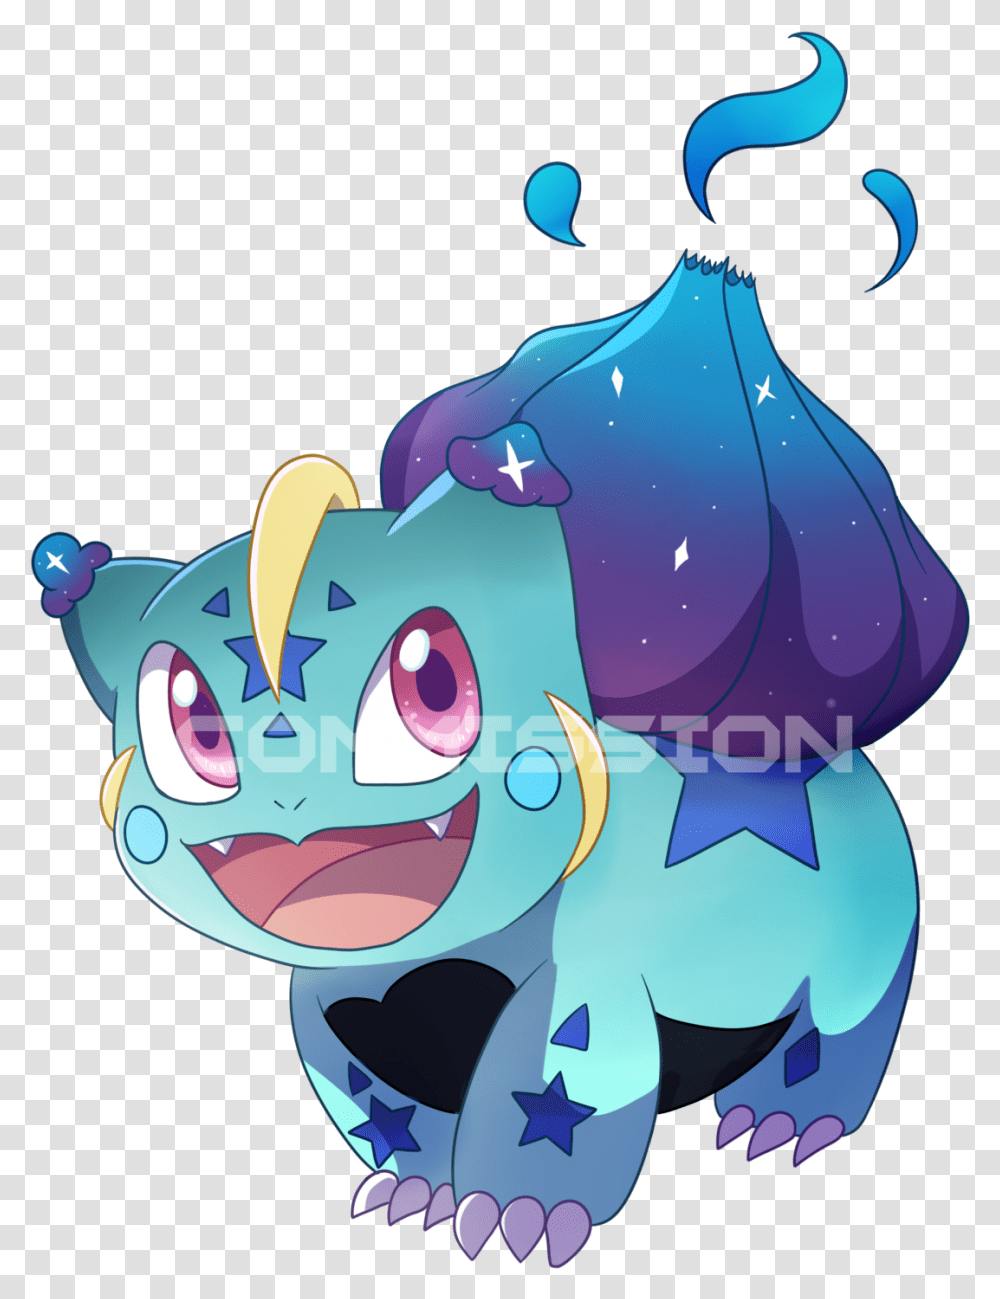 Commission Of A Bulbasaurcosmog Fusion Also Known Pokemon Cosmog Fusion, Floral Design, Pattern Transparent Png